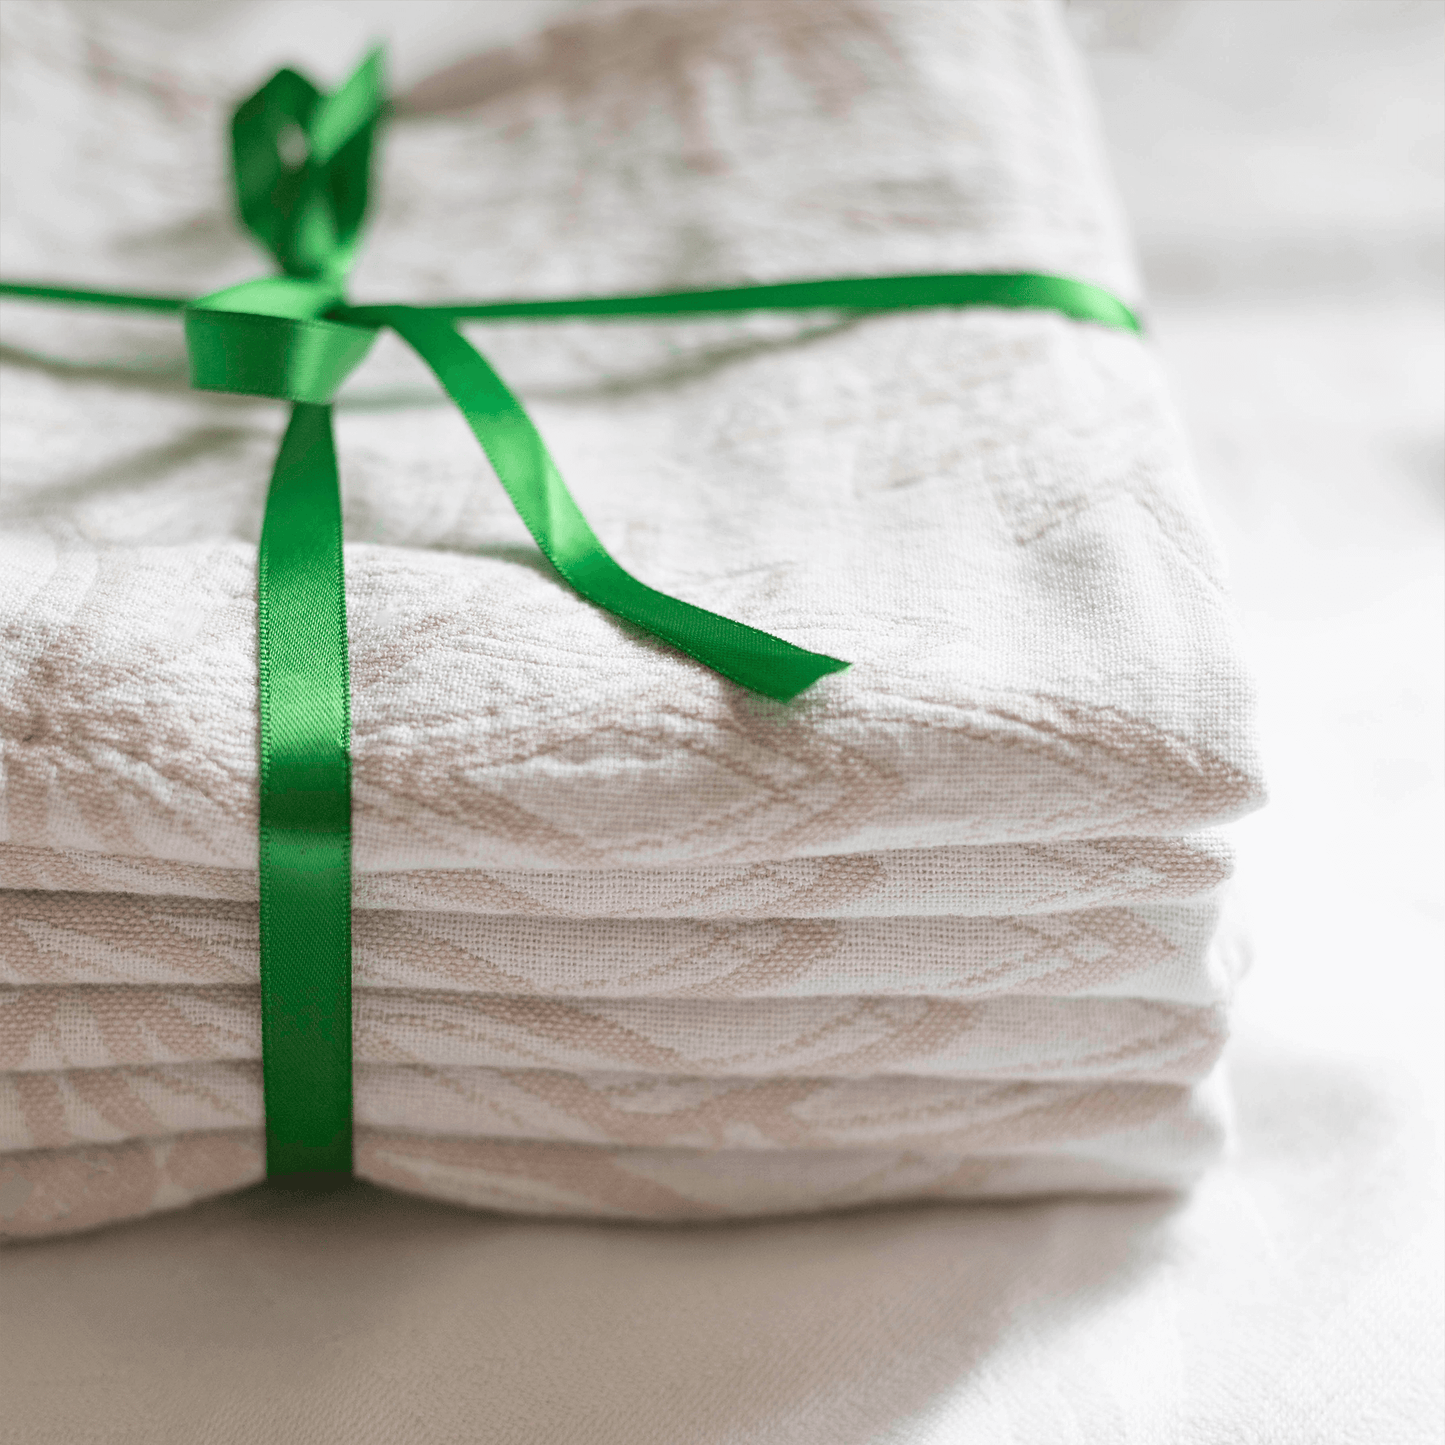 Turkish towels as a gift